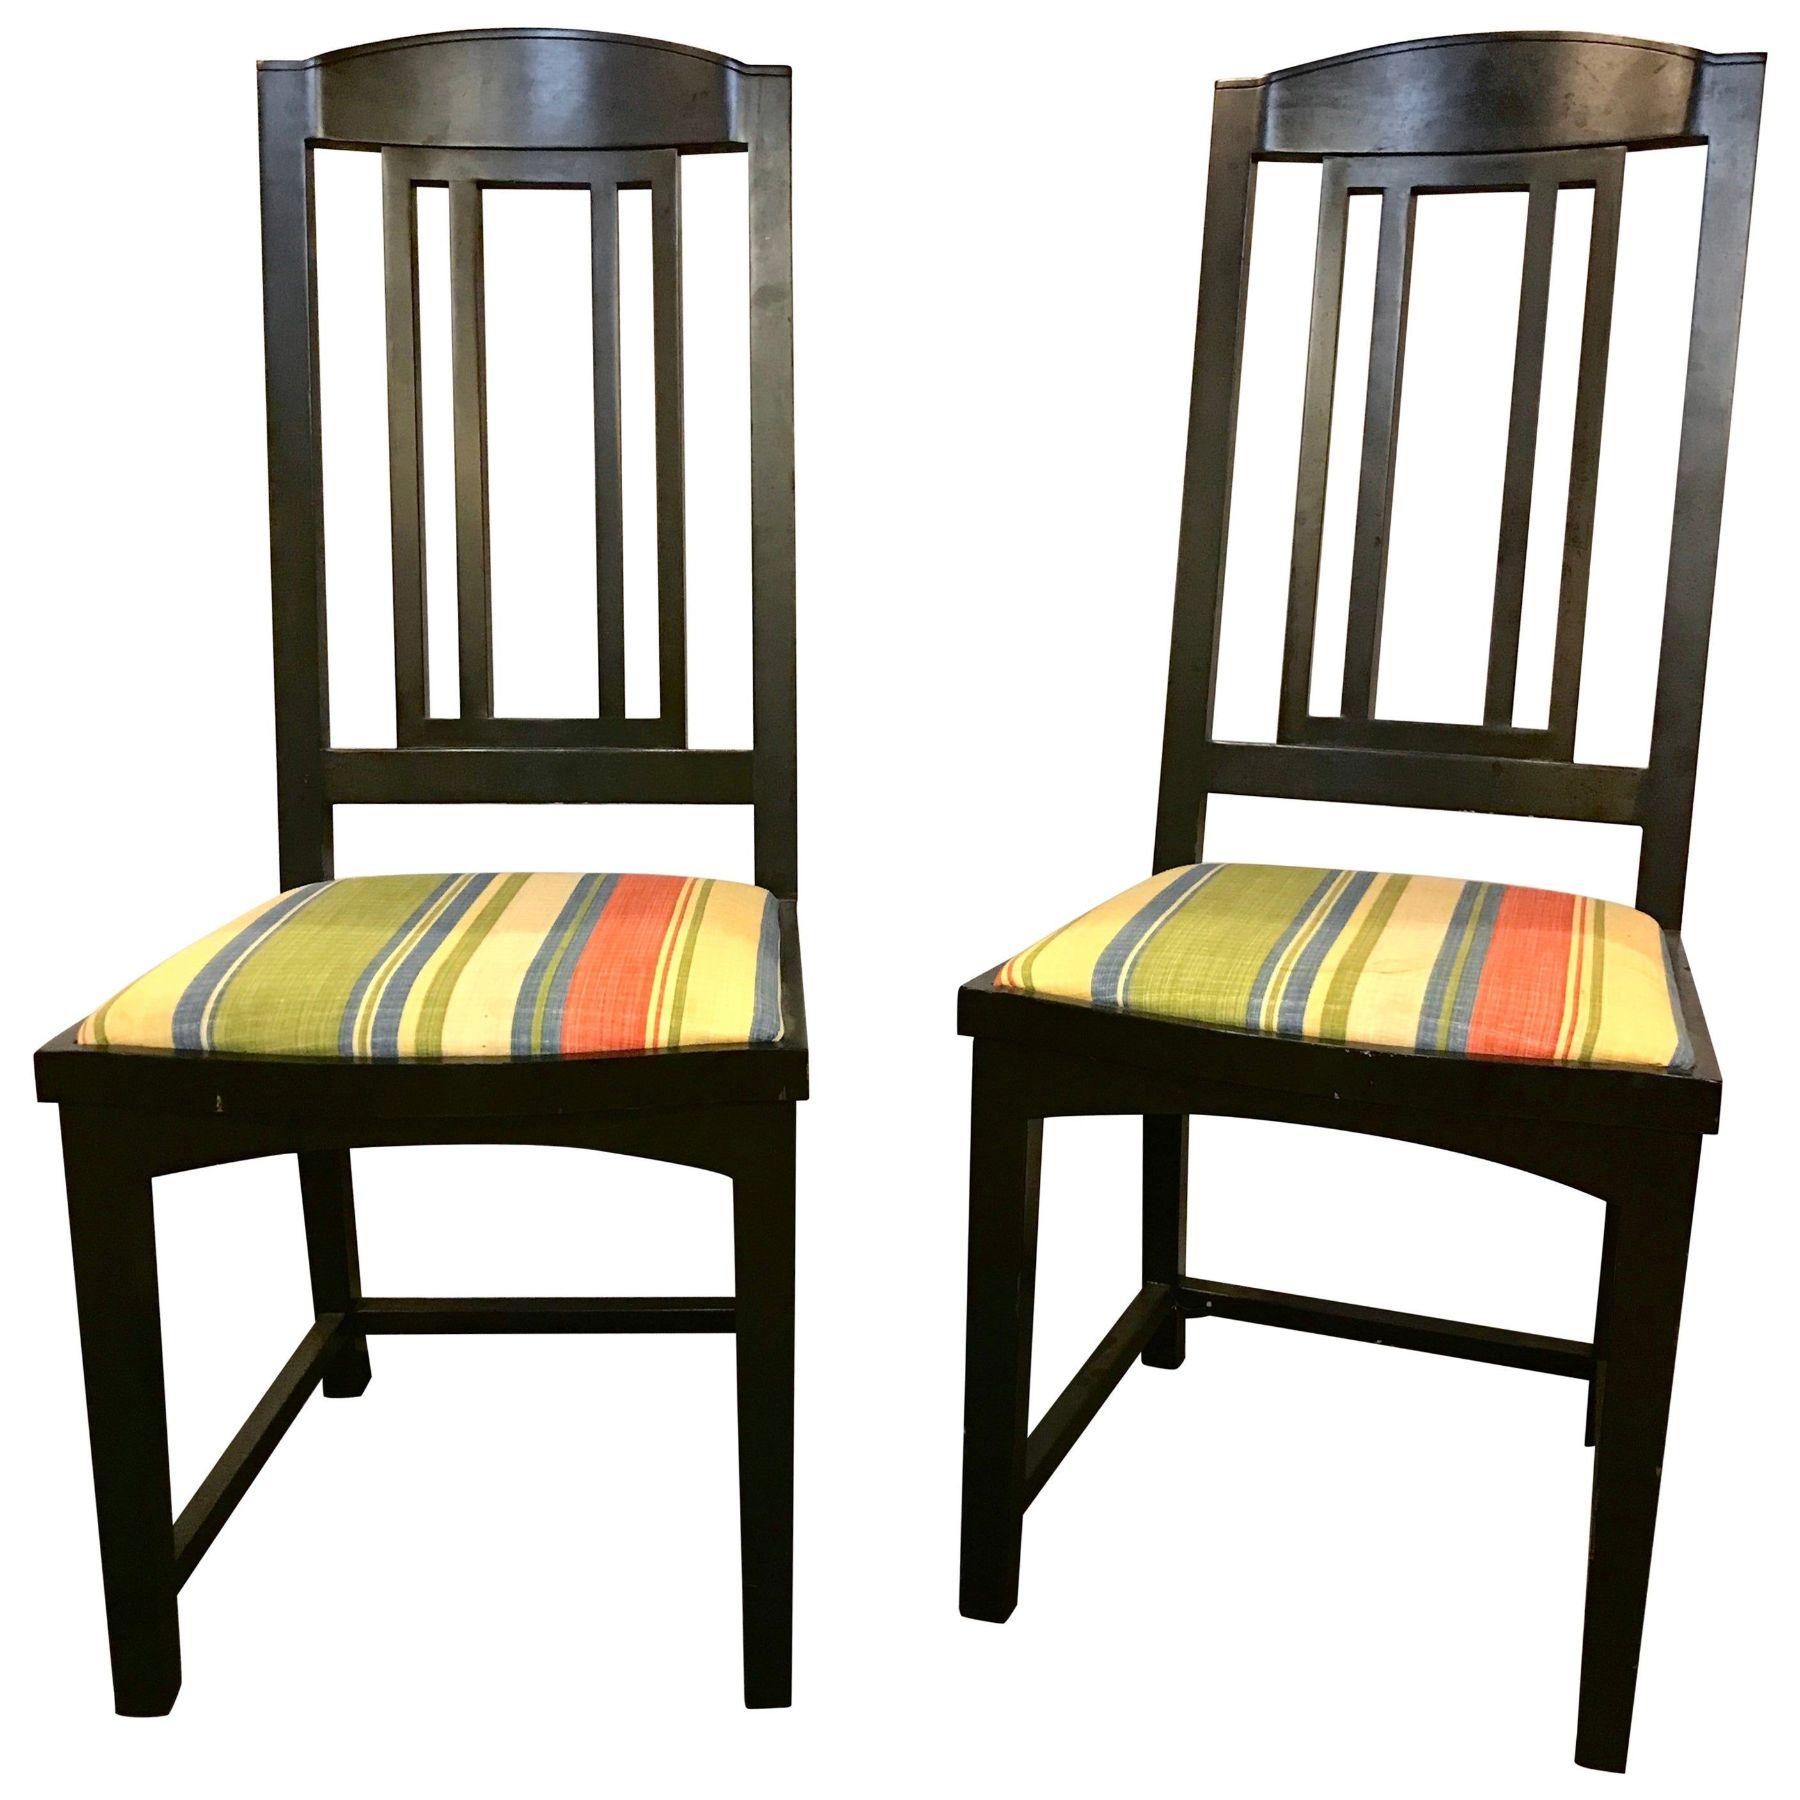 A set of 4 slat back ebony side or dining chairs from Pace Modern collection each having long sleek backrests on stripped upholstered seats. Can purchase two. There are stains on the upholstery.